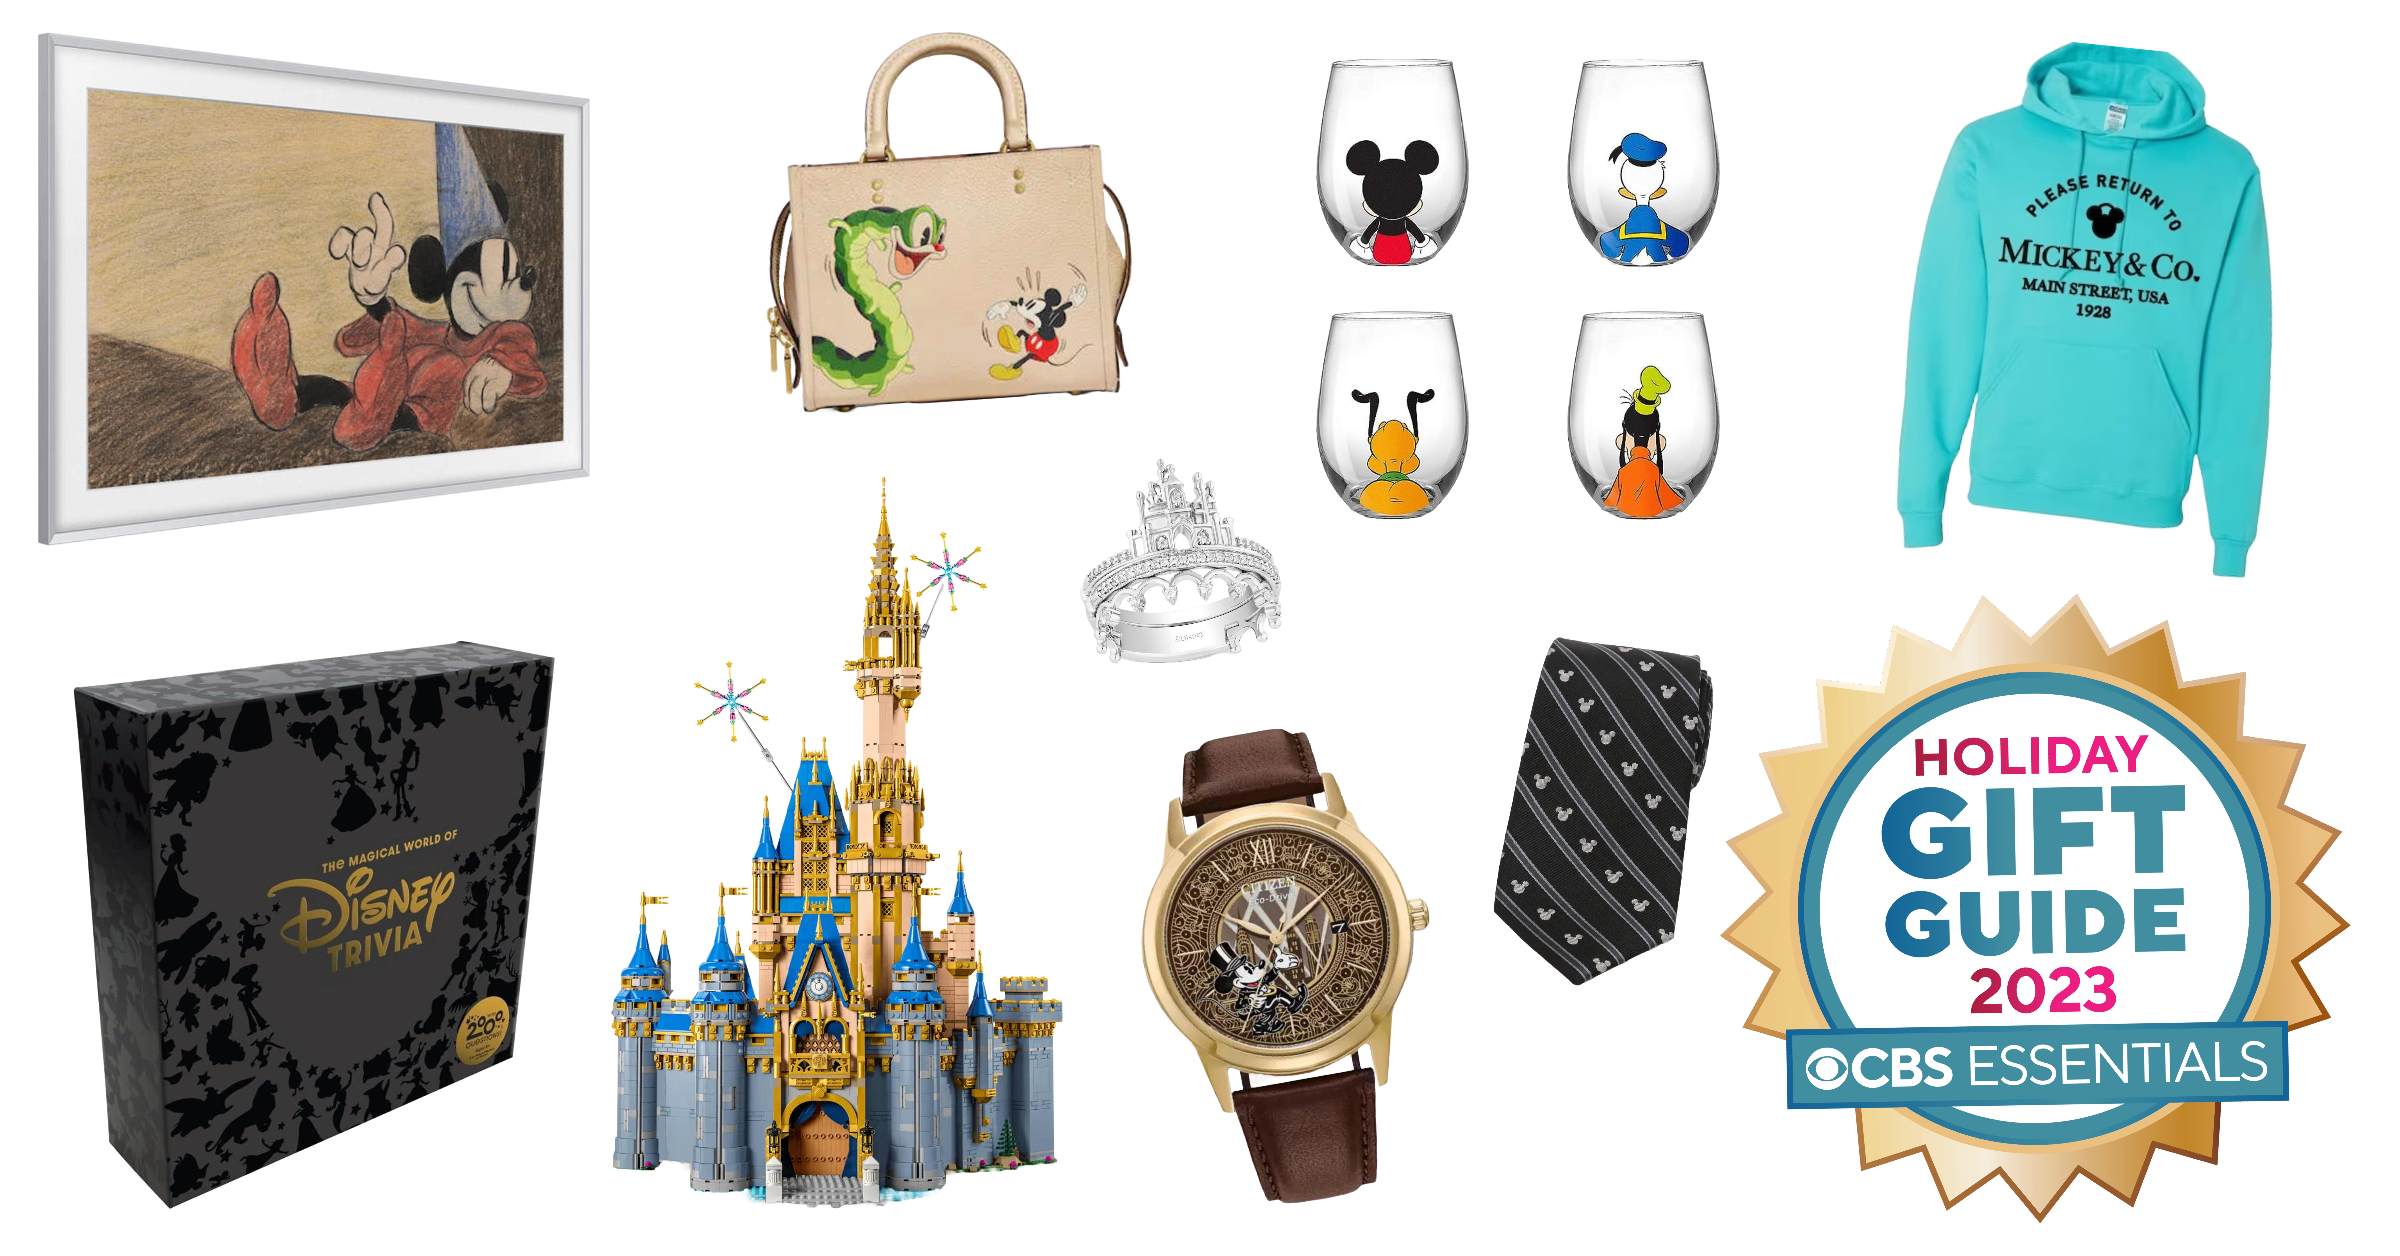 These Christmas gifts are perfect for Disney people of all ages